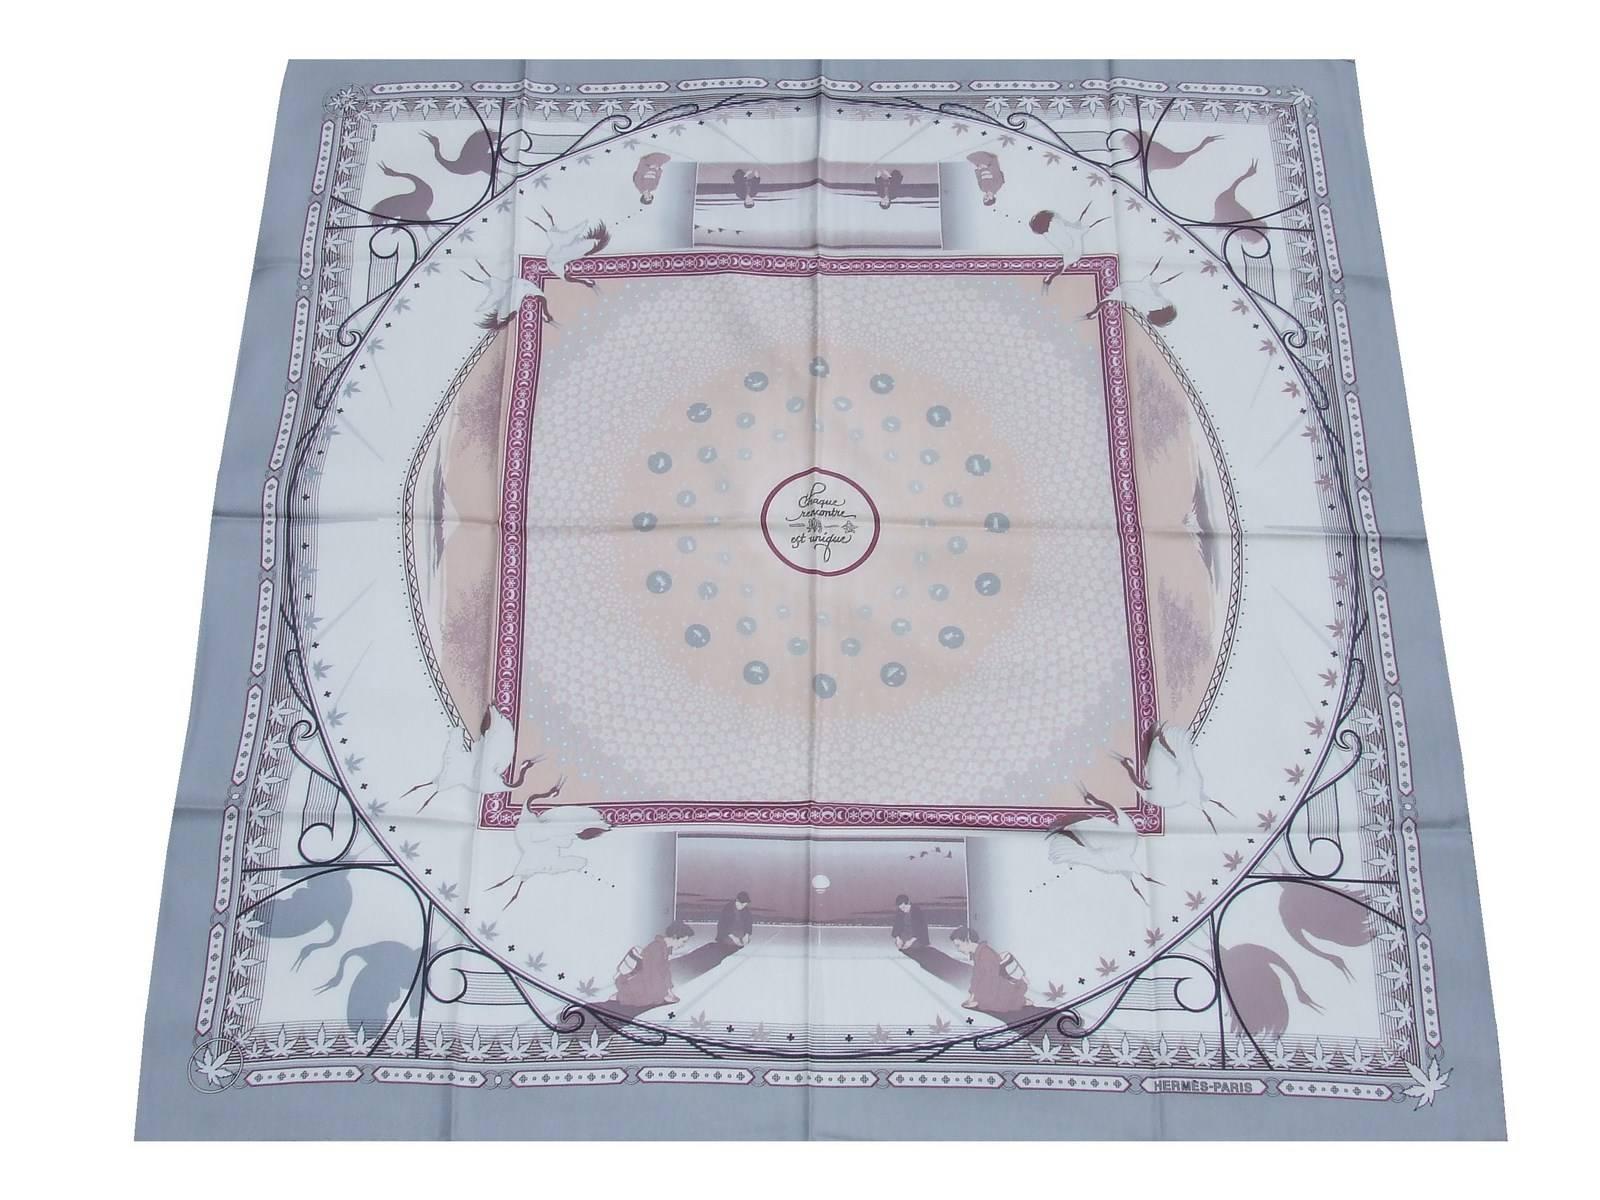 ABSOLUTELY STUNNING AUTHENTIC HERMES SCARF

Pattern: 